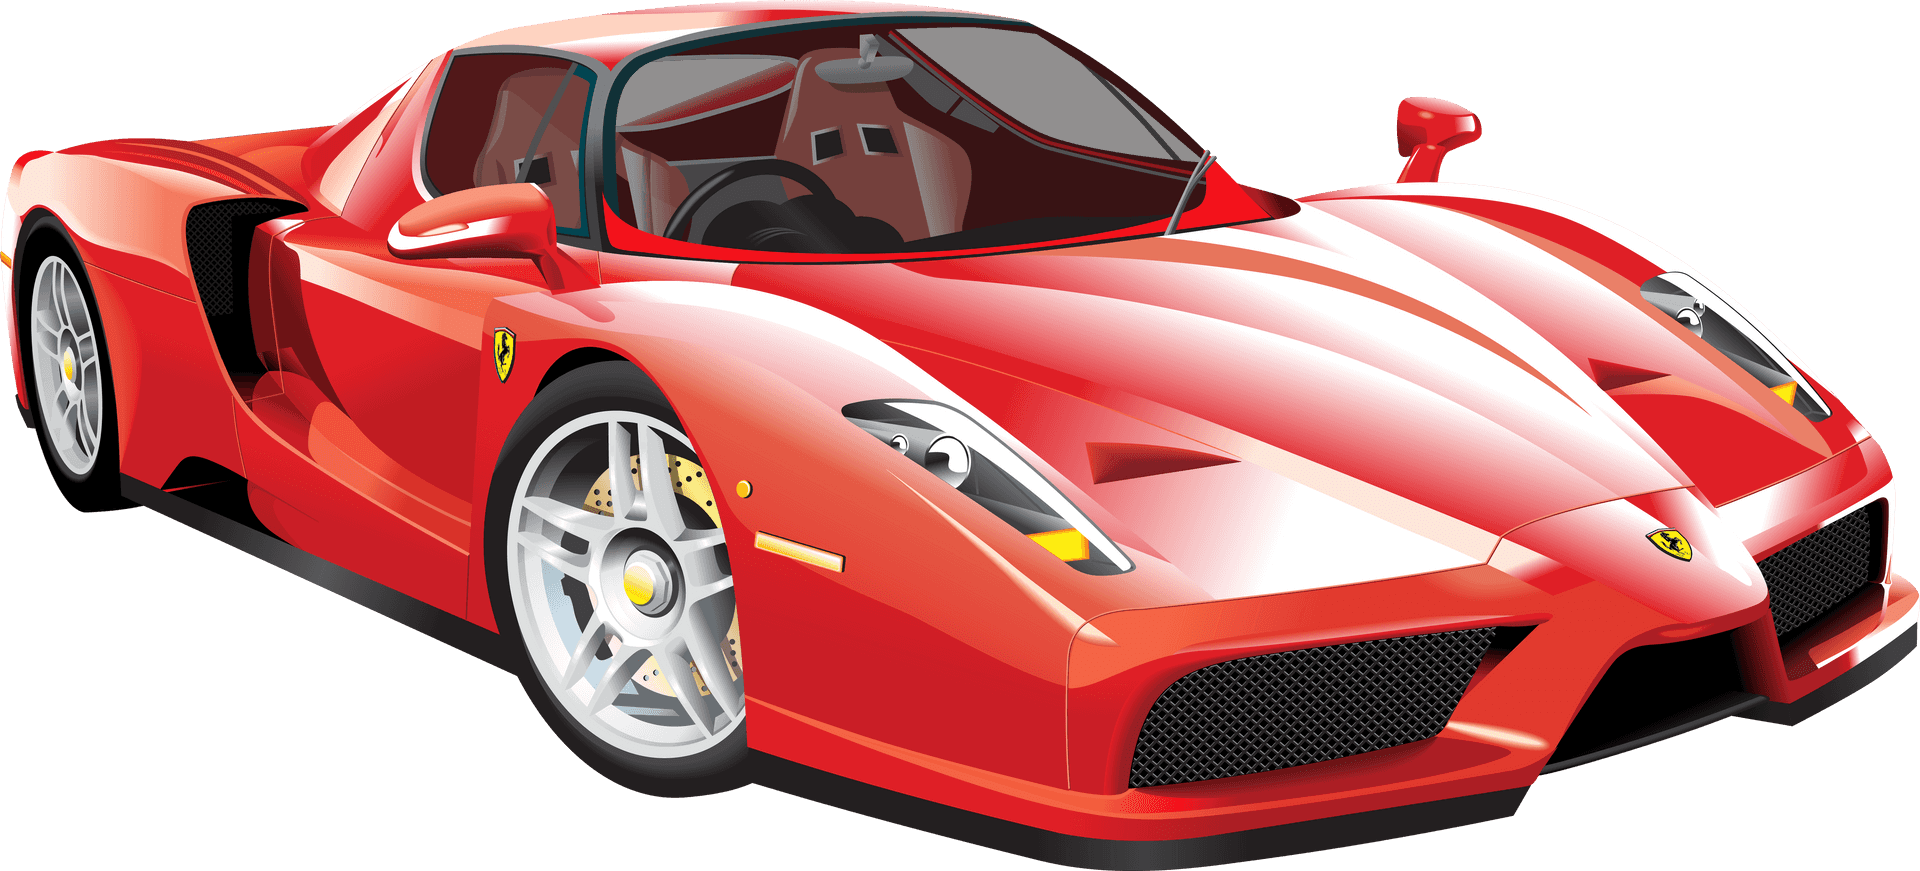 Red Luxury Sports Car Illustration.png PNG